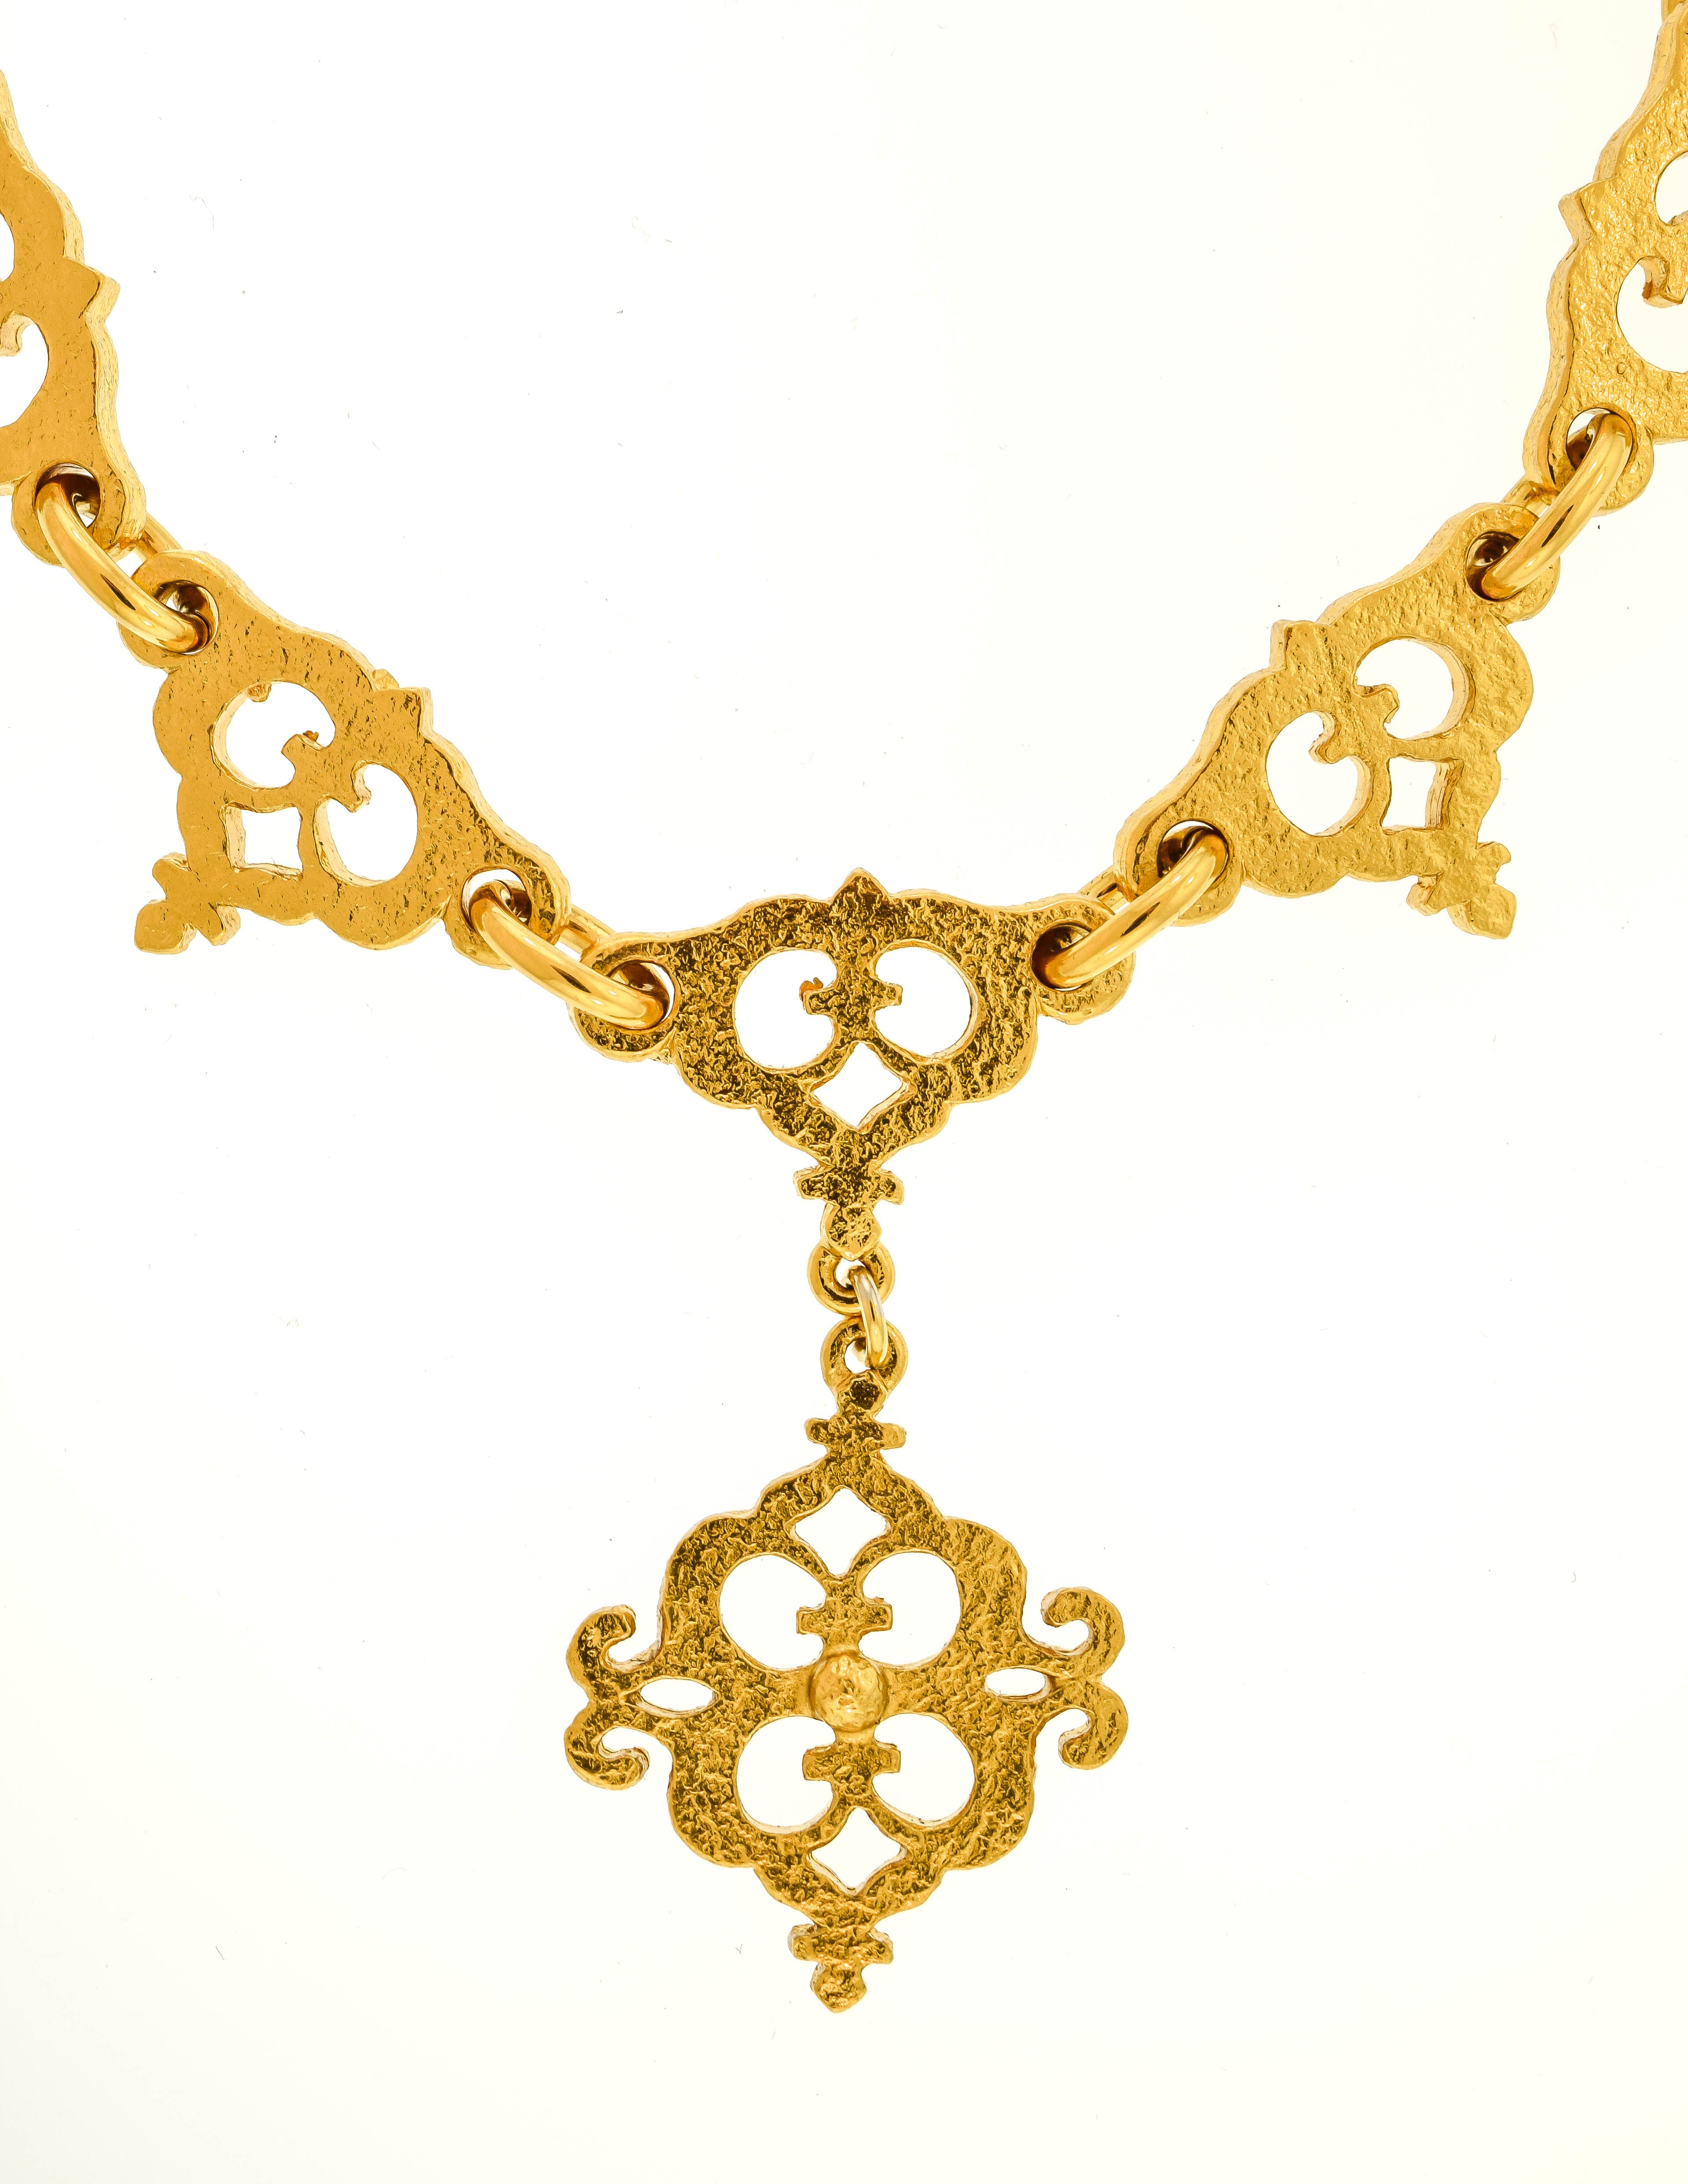 Yves Saint Laurent Vintage Gold Textured Ornate Pendant Necklace - from ...